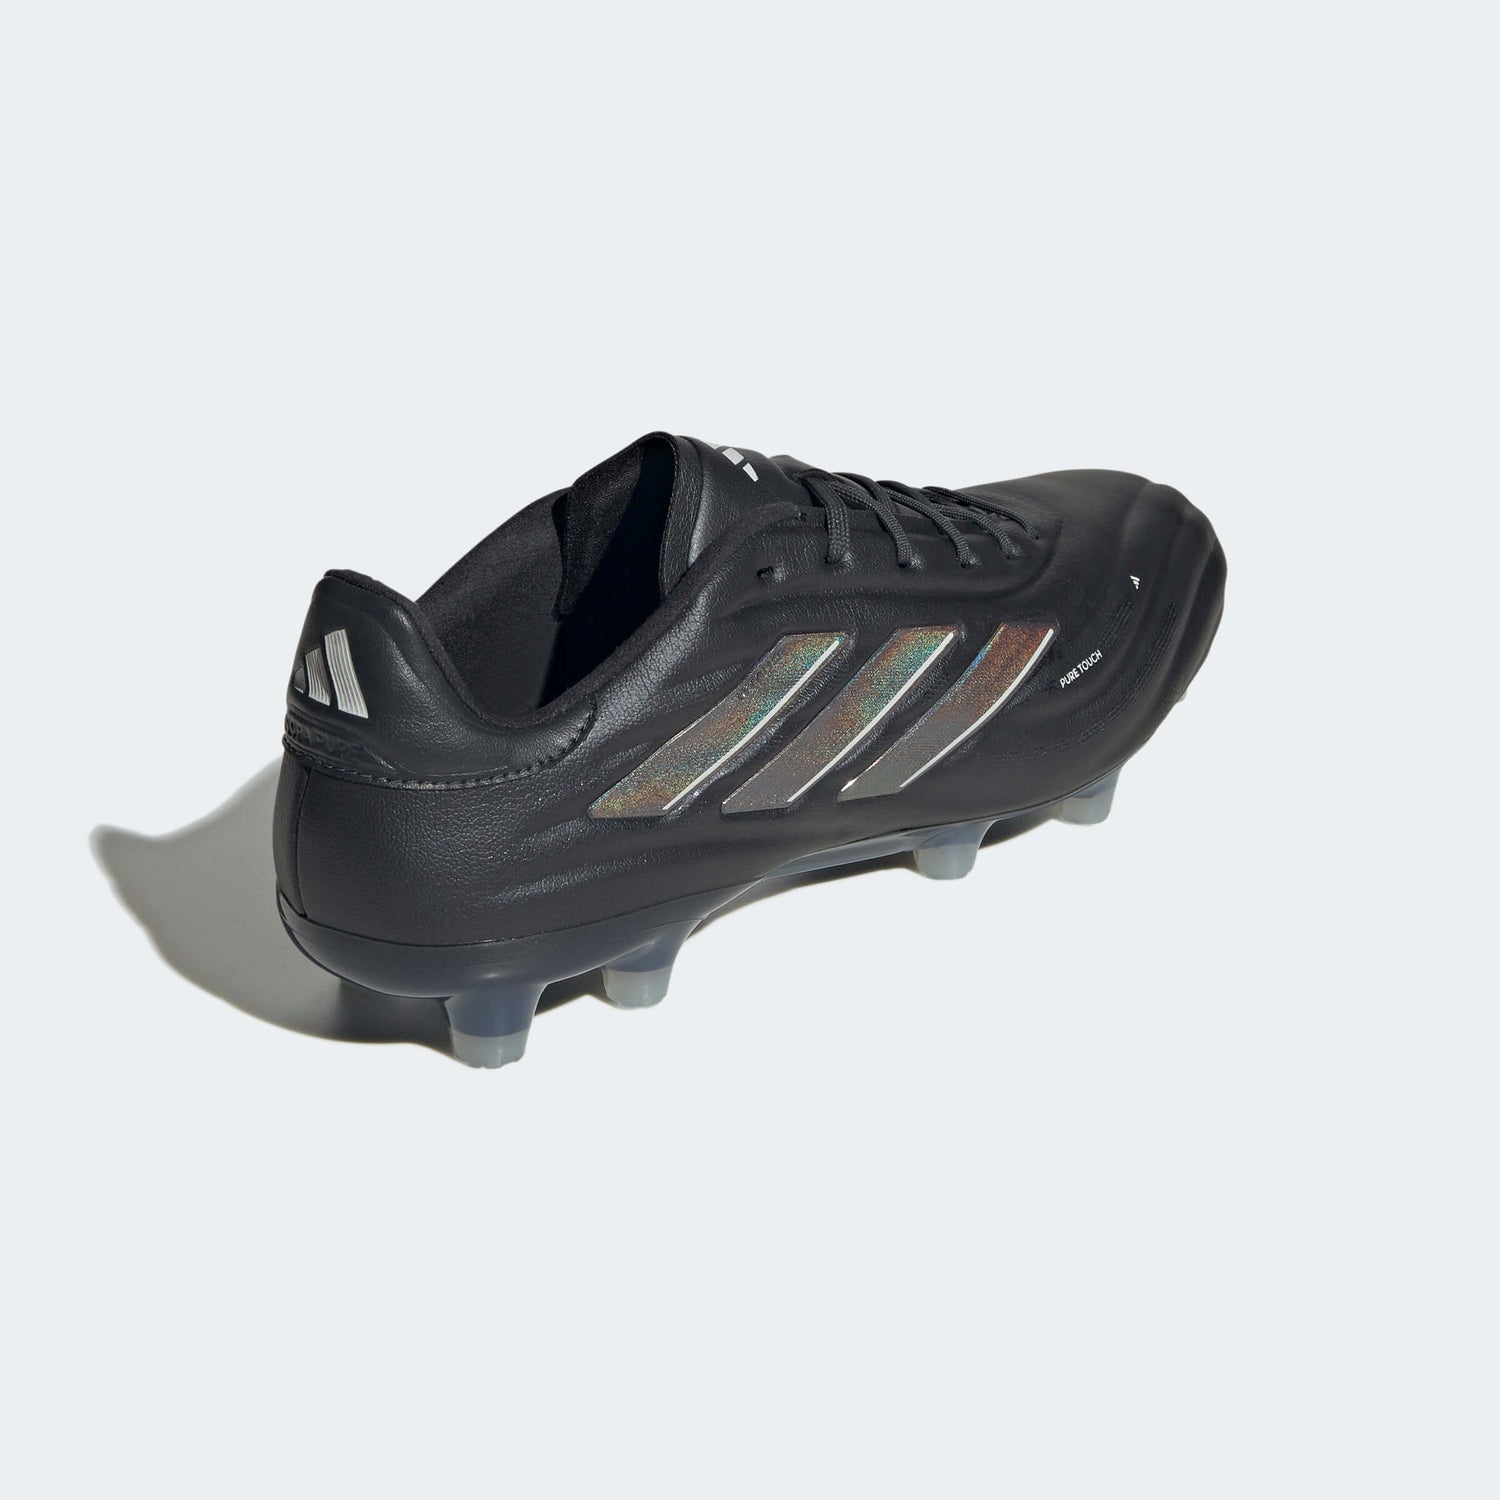 adidas Copa Pure 2 Elite FG - (HO23) Core Black - Carbon - Grey One (Lateral - Back)